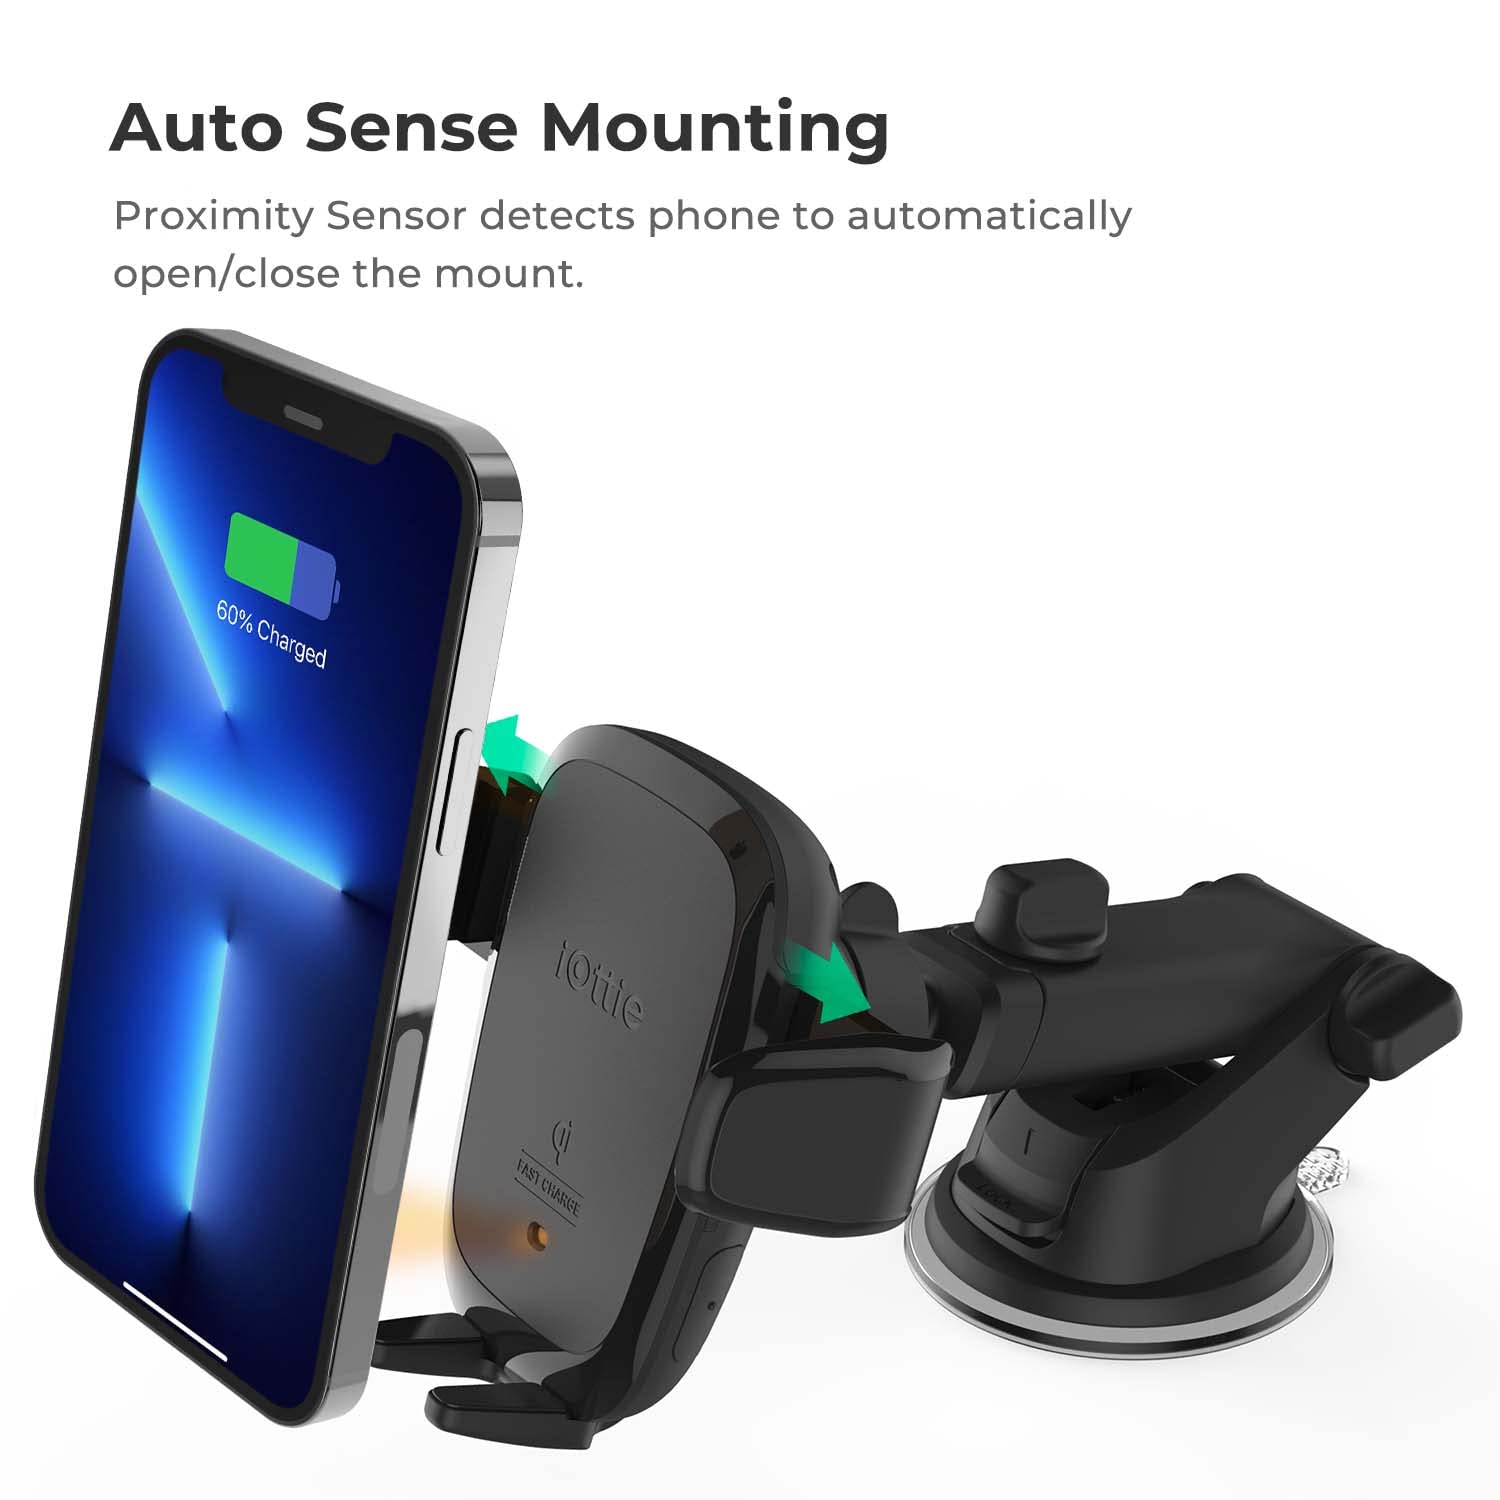 iOttie Auto Sense Qi Wireless Car Charger - Automatic Clamping Dashboard Phone Mount with Wireless Charging for Google Pixel, iPhone, Samsung Galaxy, Huawei, LG, and other Smartphones